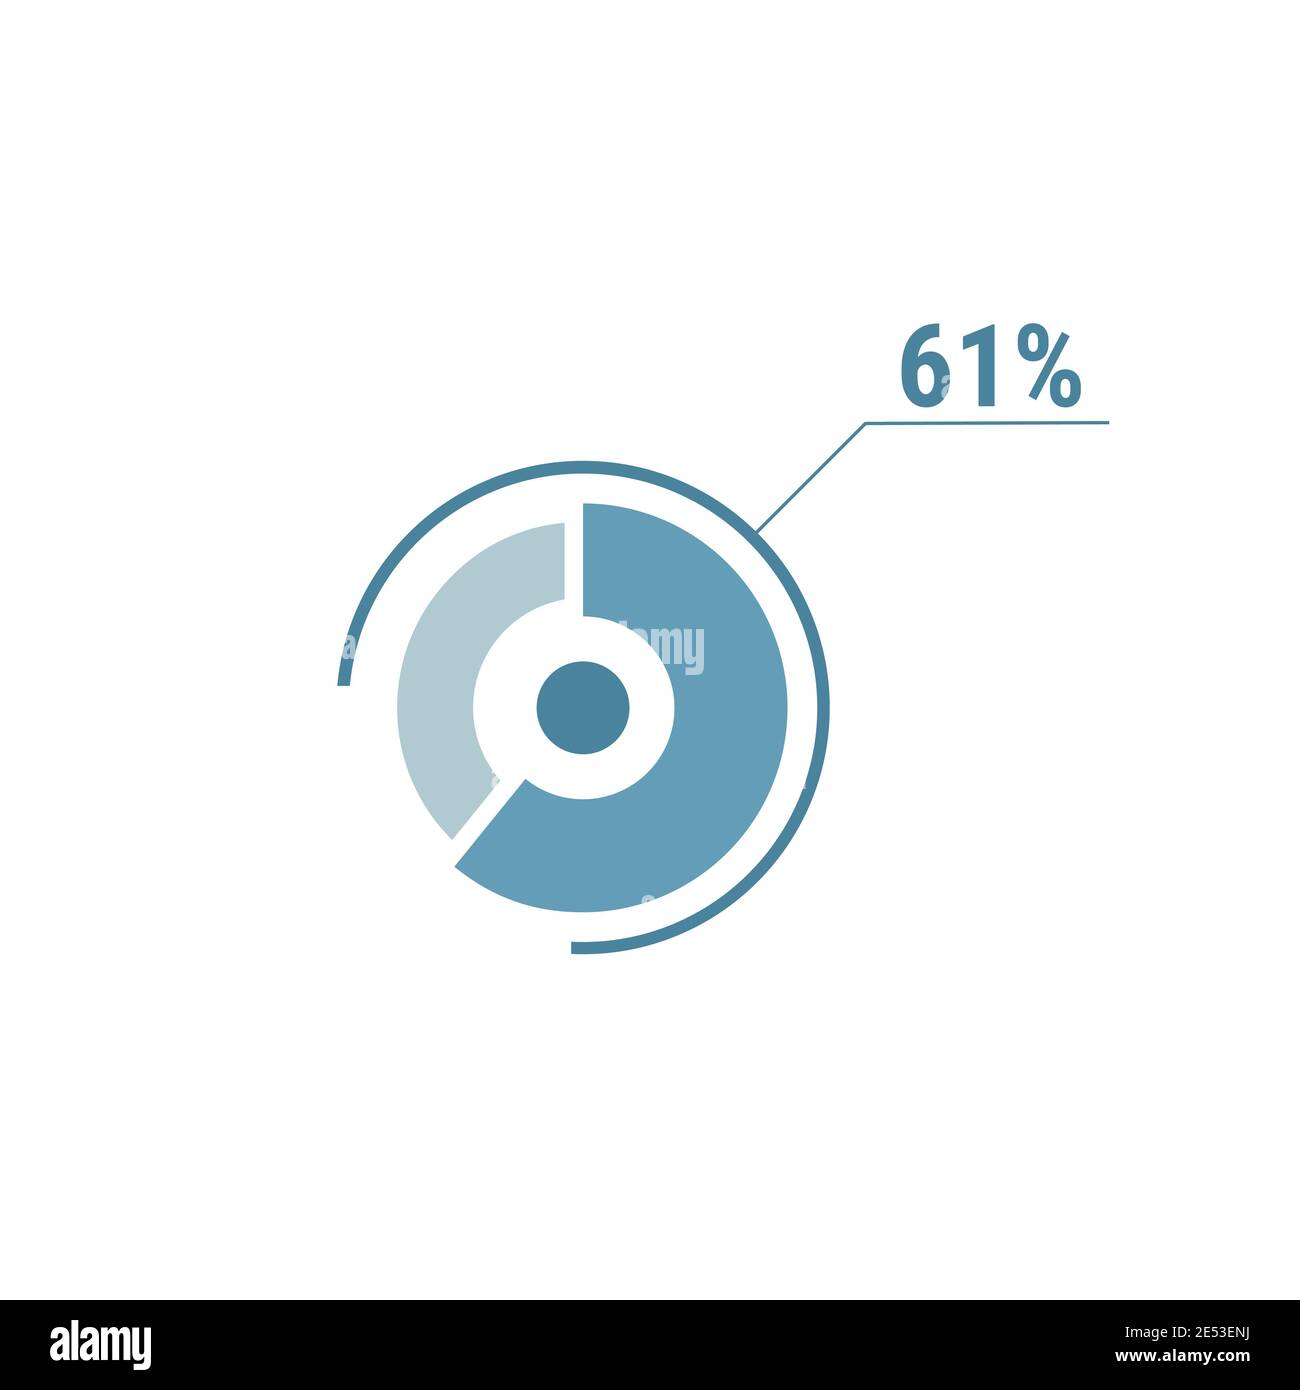 Circle diagram sixty one percent pie chart 61. Circle percentage vector diagram. Flat vector illustration for web UI design, blue on white background. Stock Vector